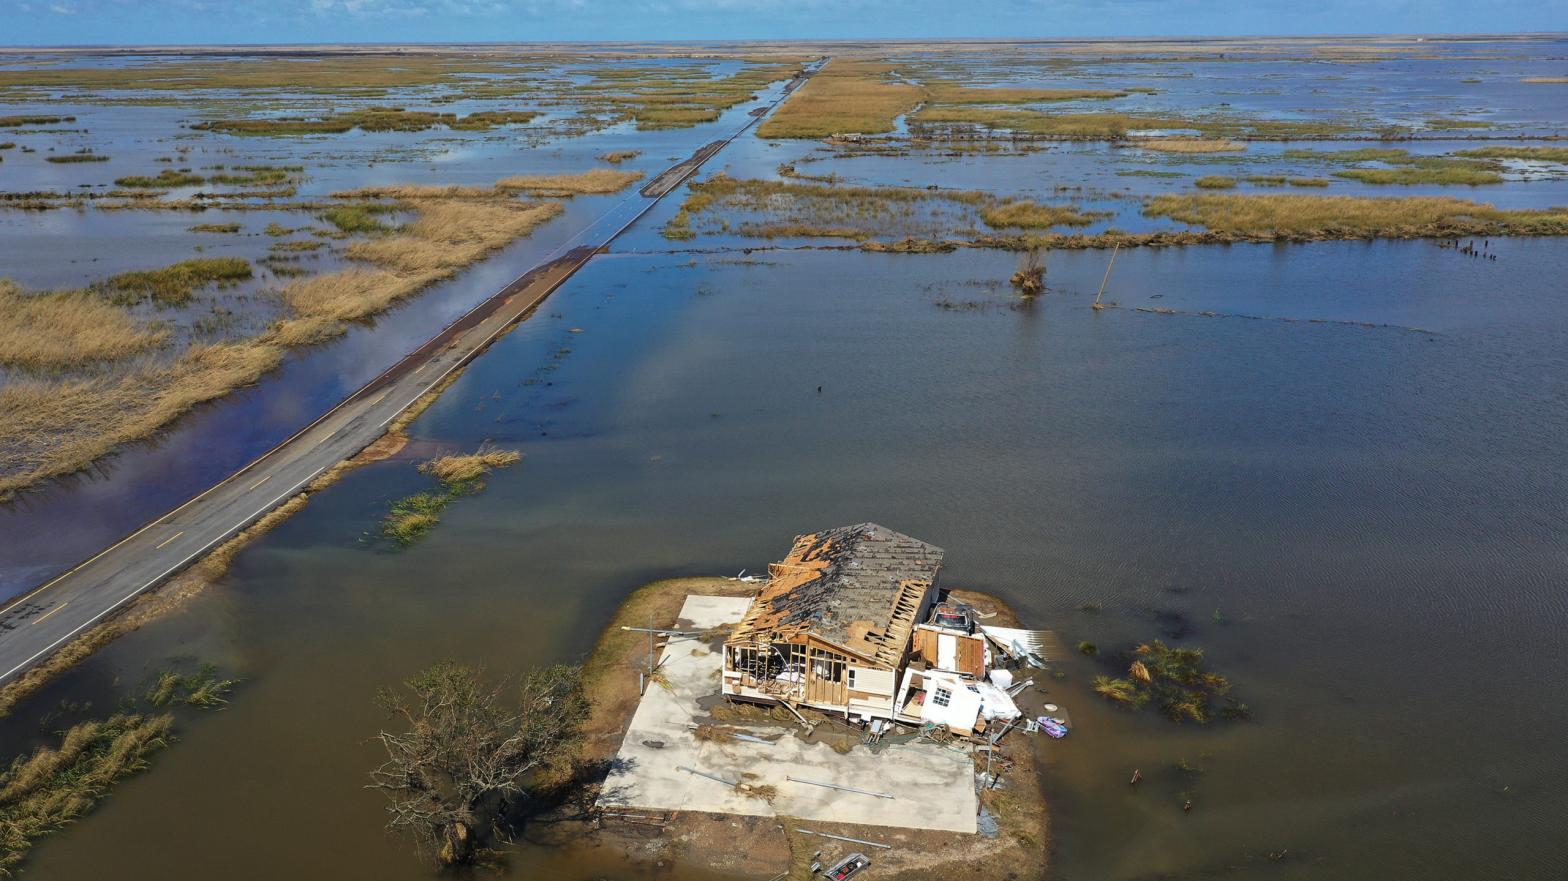 An aerial view from a drone shows a damaged home surrounded by water in Little Chenier, Louisiana following Hurricane Laura. (Photo: Joe Raedle, Getty Images)